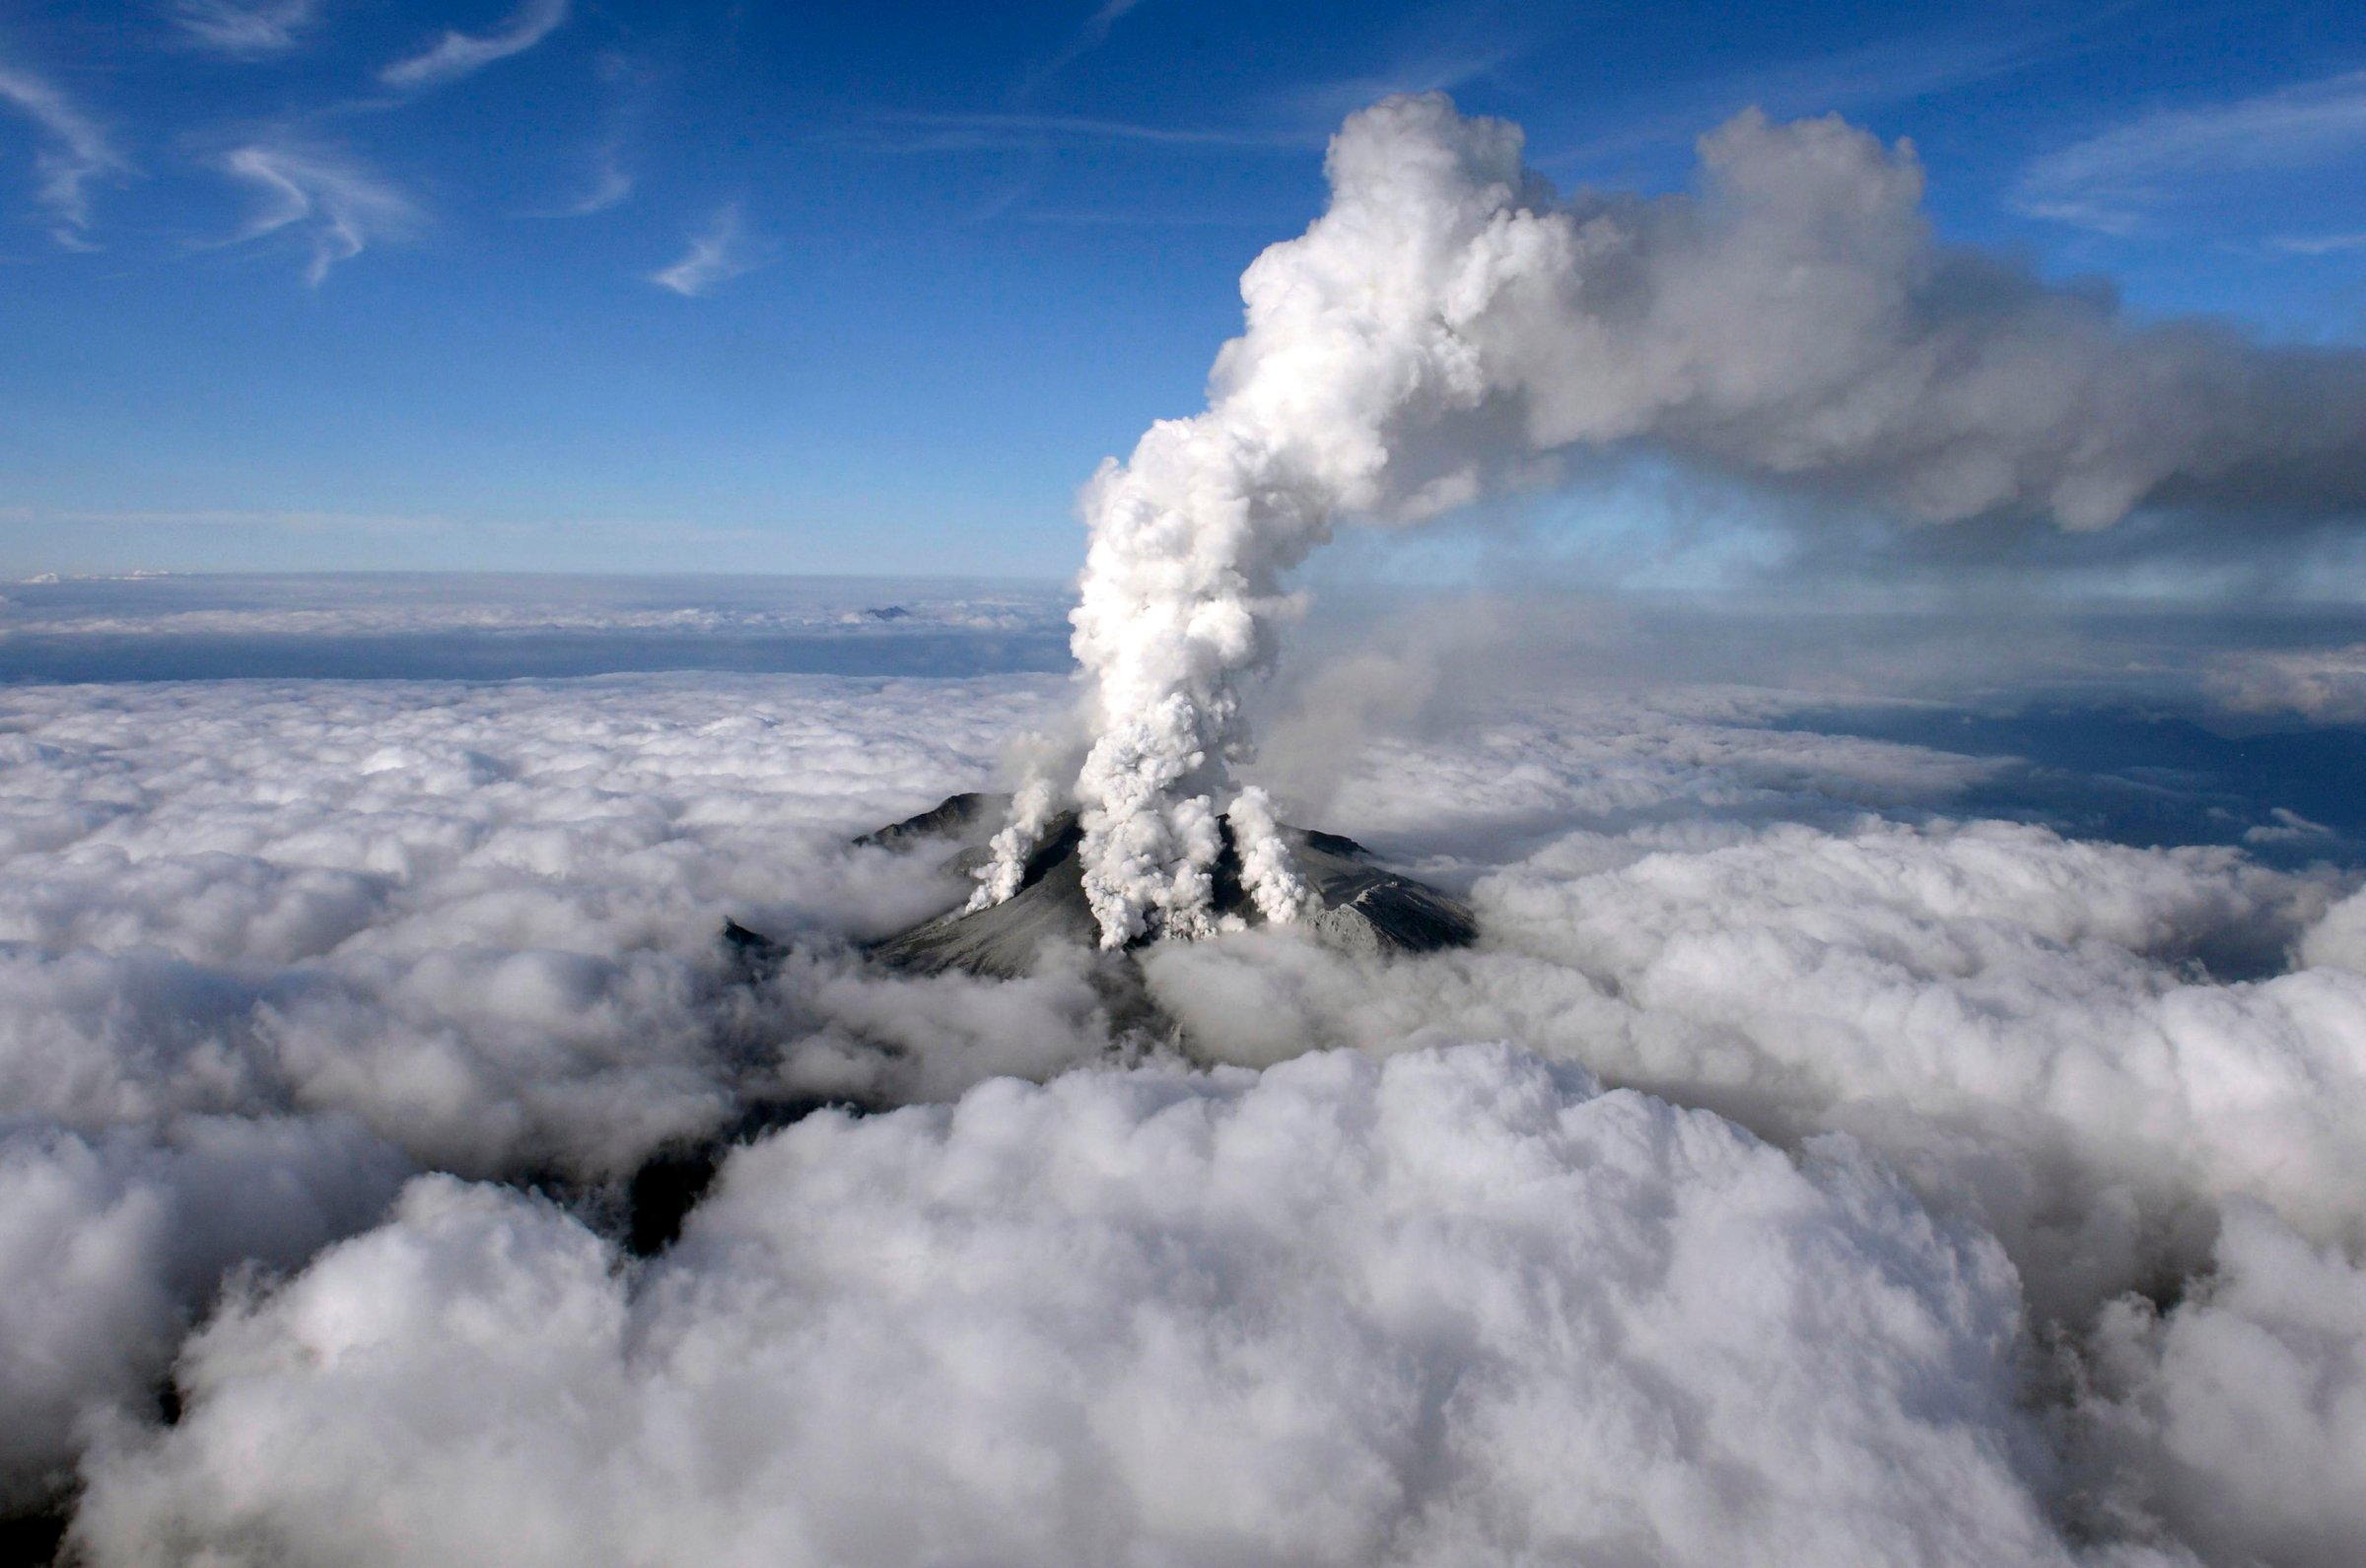 Volcanic smoke rises from Mount Ontake, which straddles Nagano and Gifu prefectures, central Japan on Sept. 27, 2014.